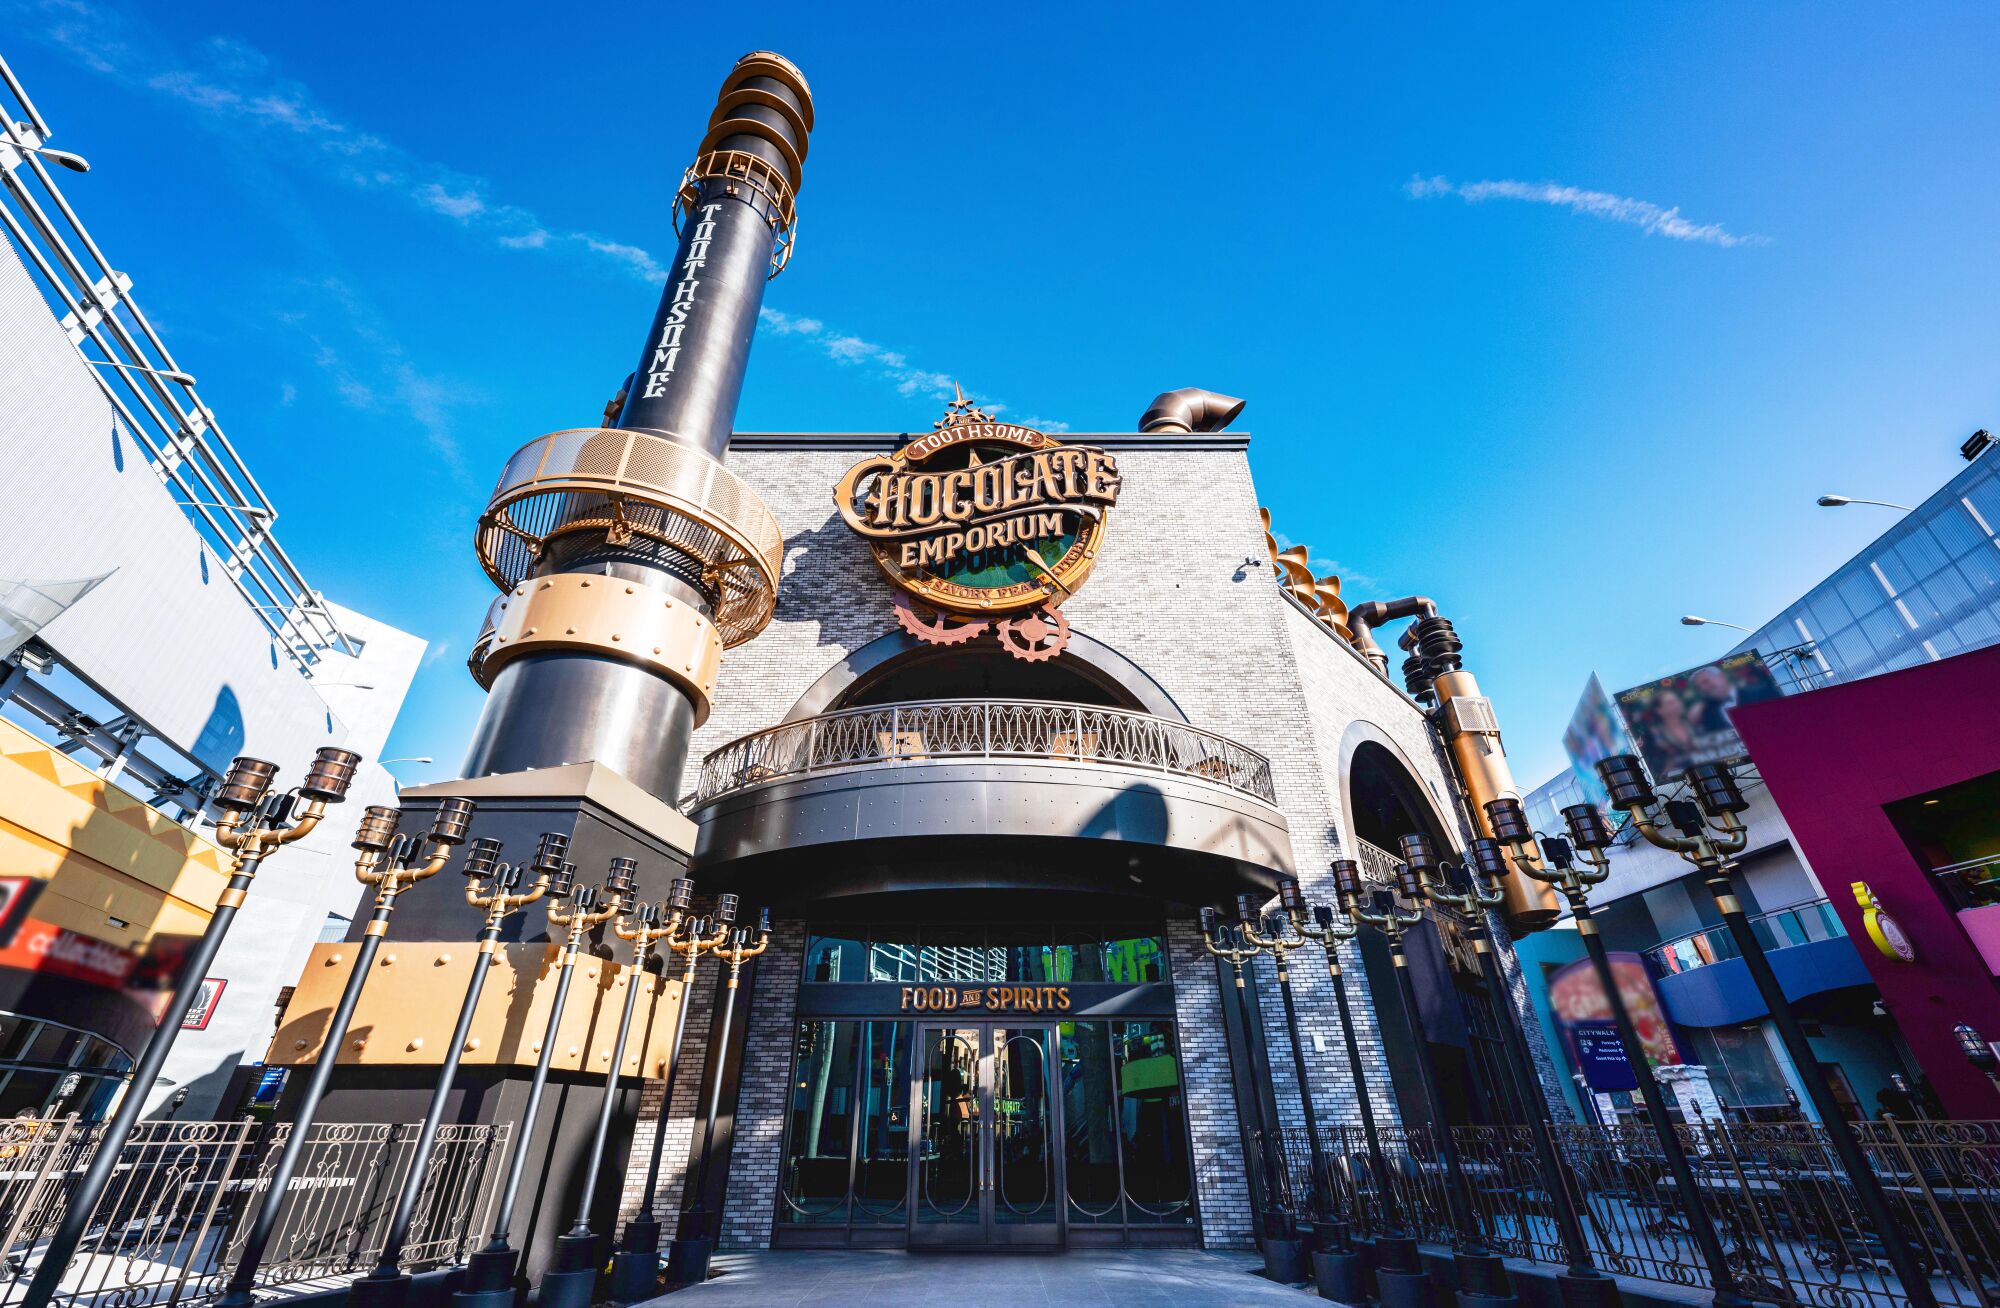 Toothsome Chocolate Emporium exterior has steampunk feel with tall embellished metal pipes and old fashioned street lamps.